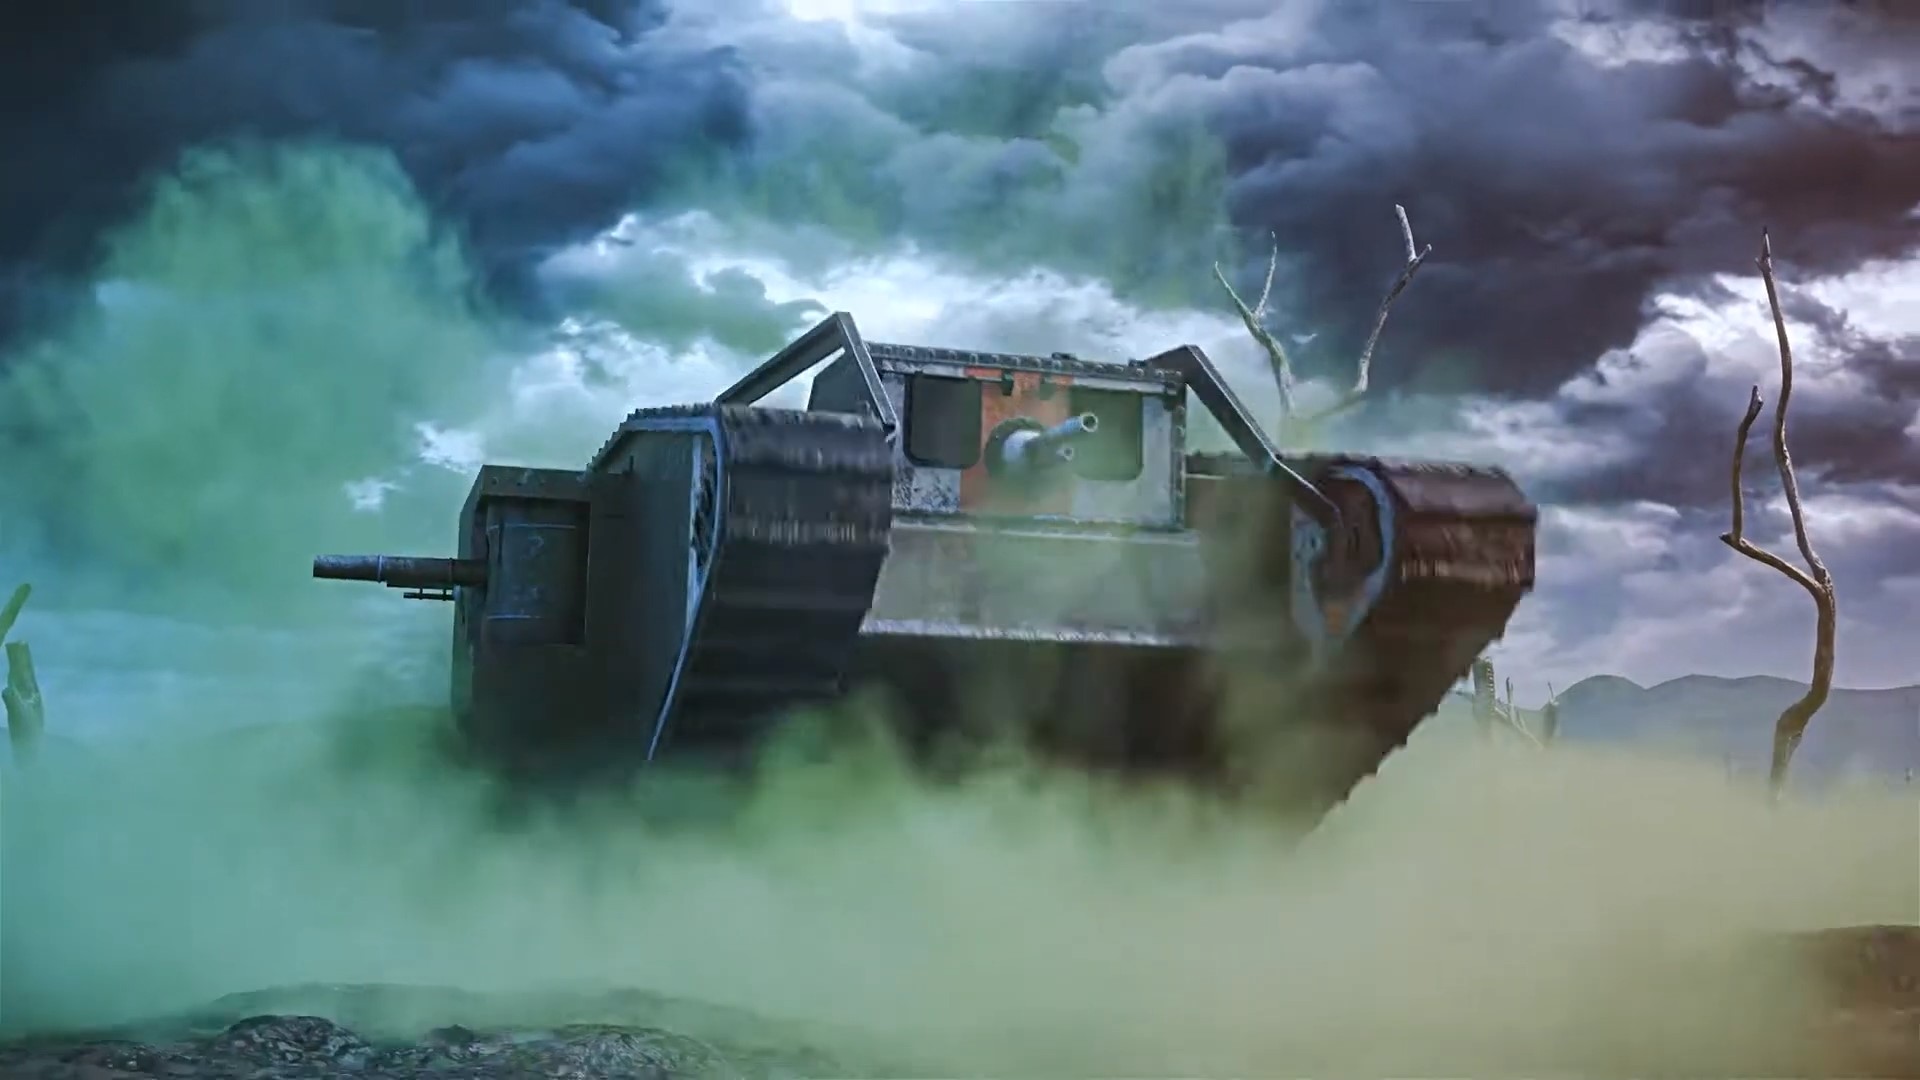 Best mobile war games: Supremacy 1. Image shows a tank rolling along.